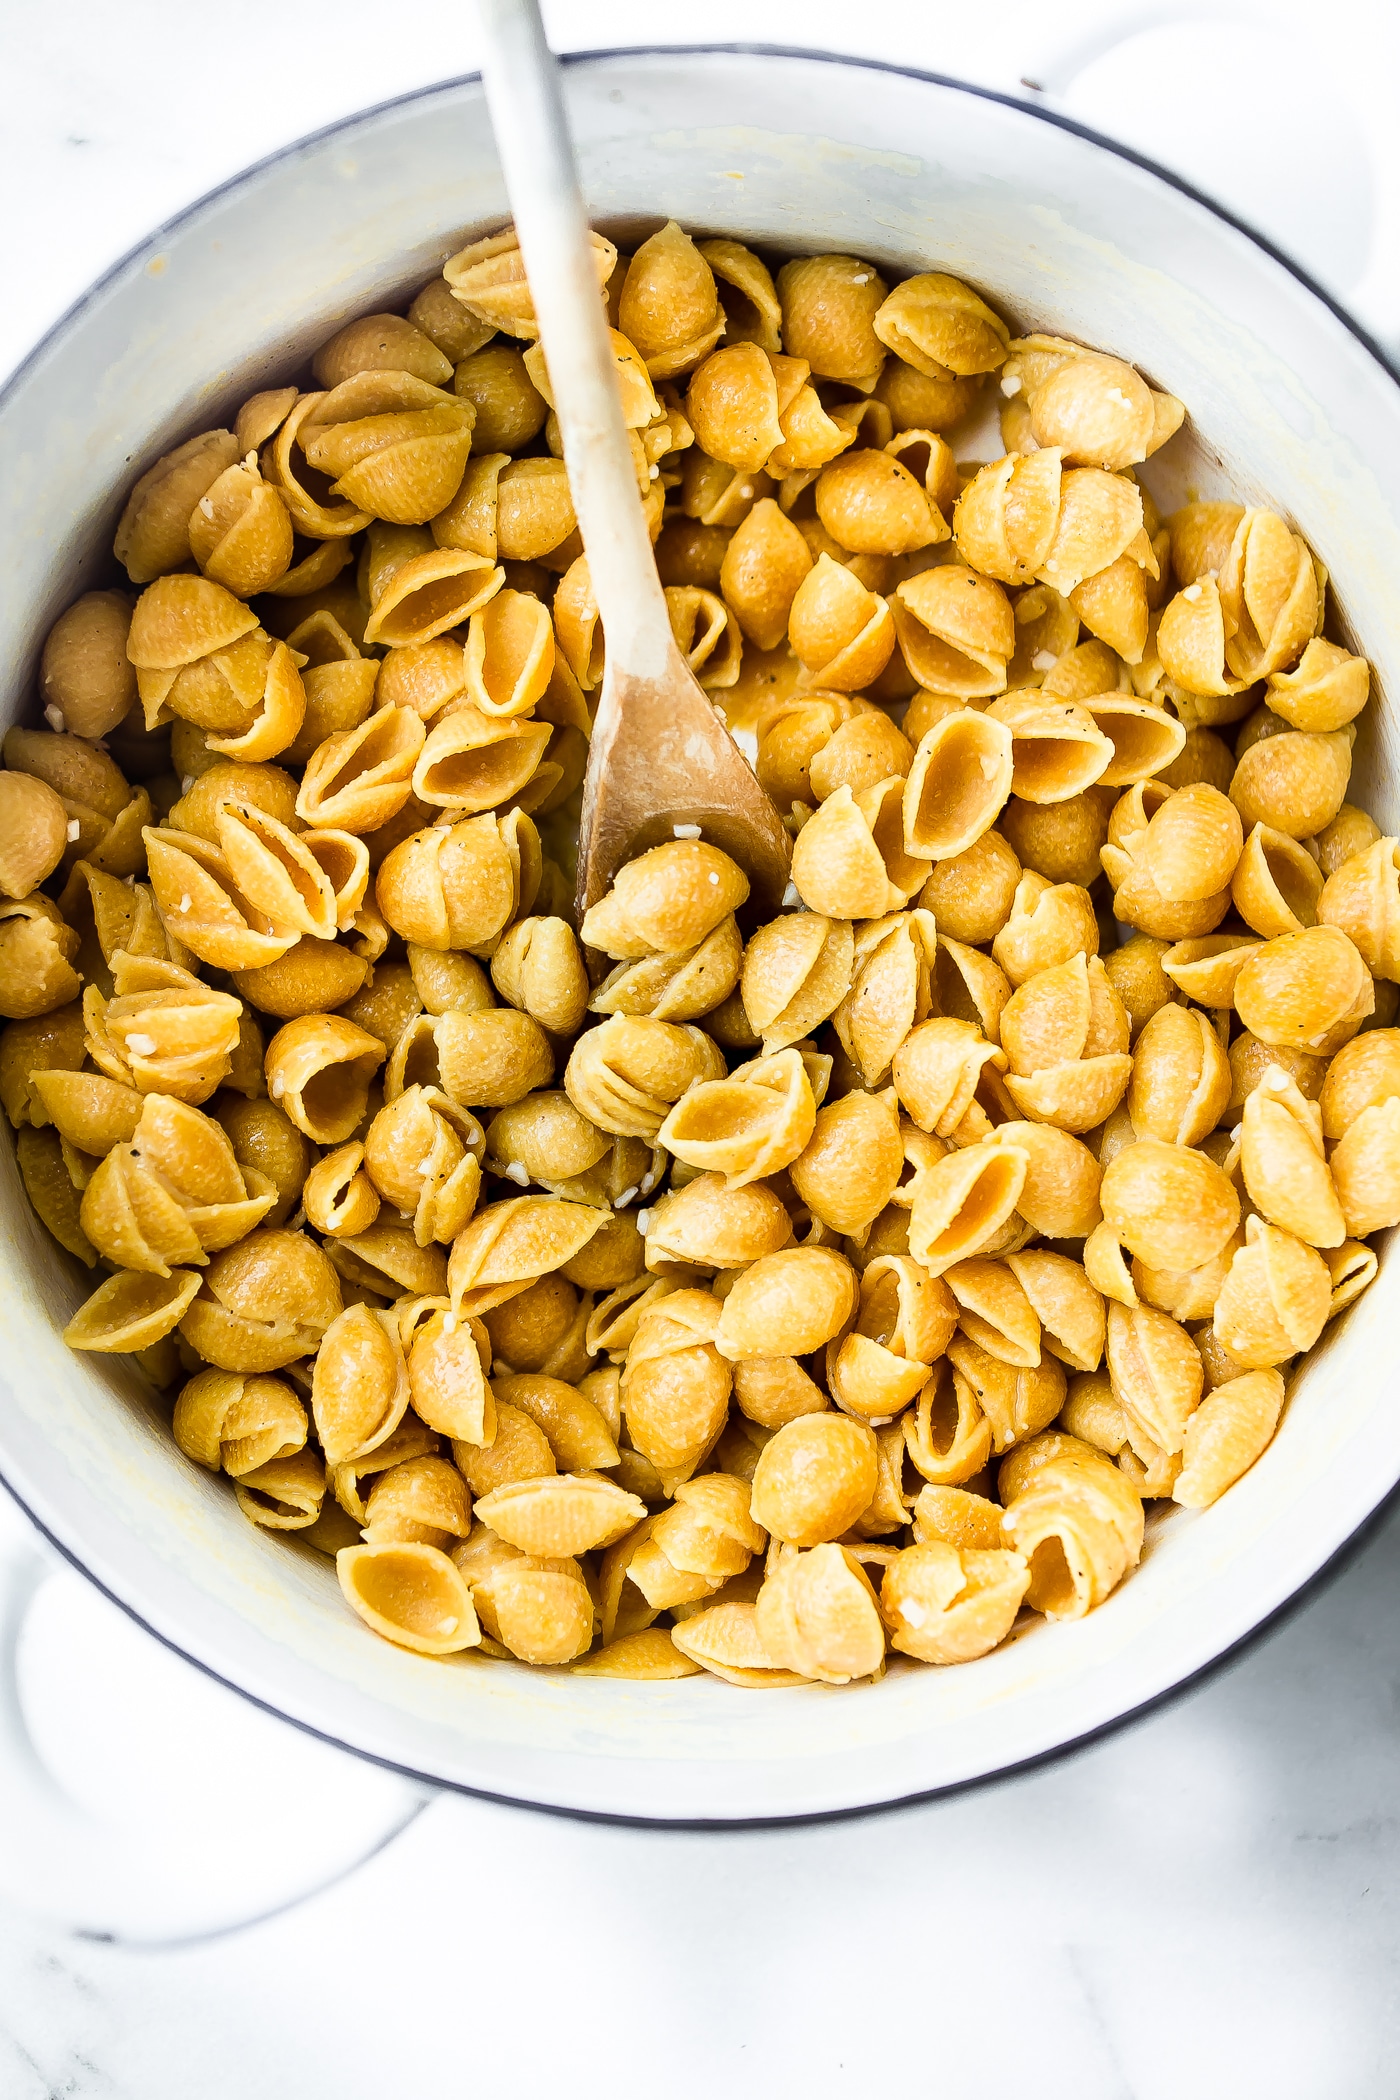 Overhead view cooked pasta mini shells in white bowl with wooden spoon.